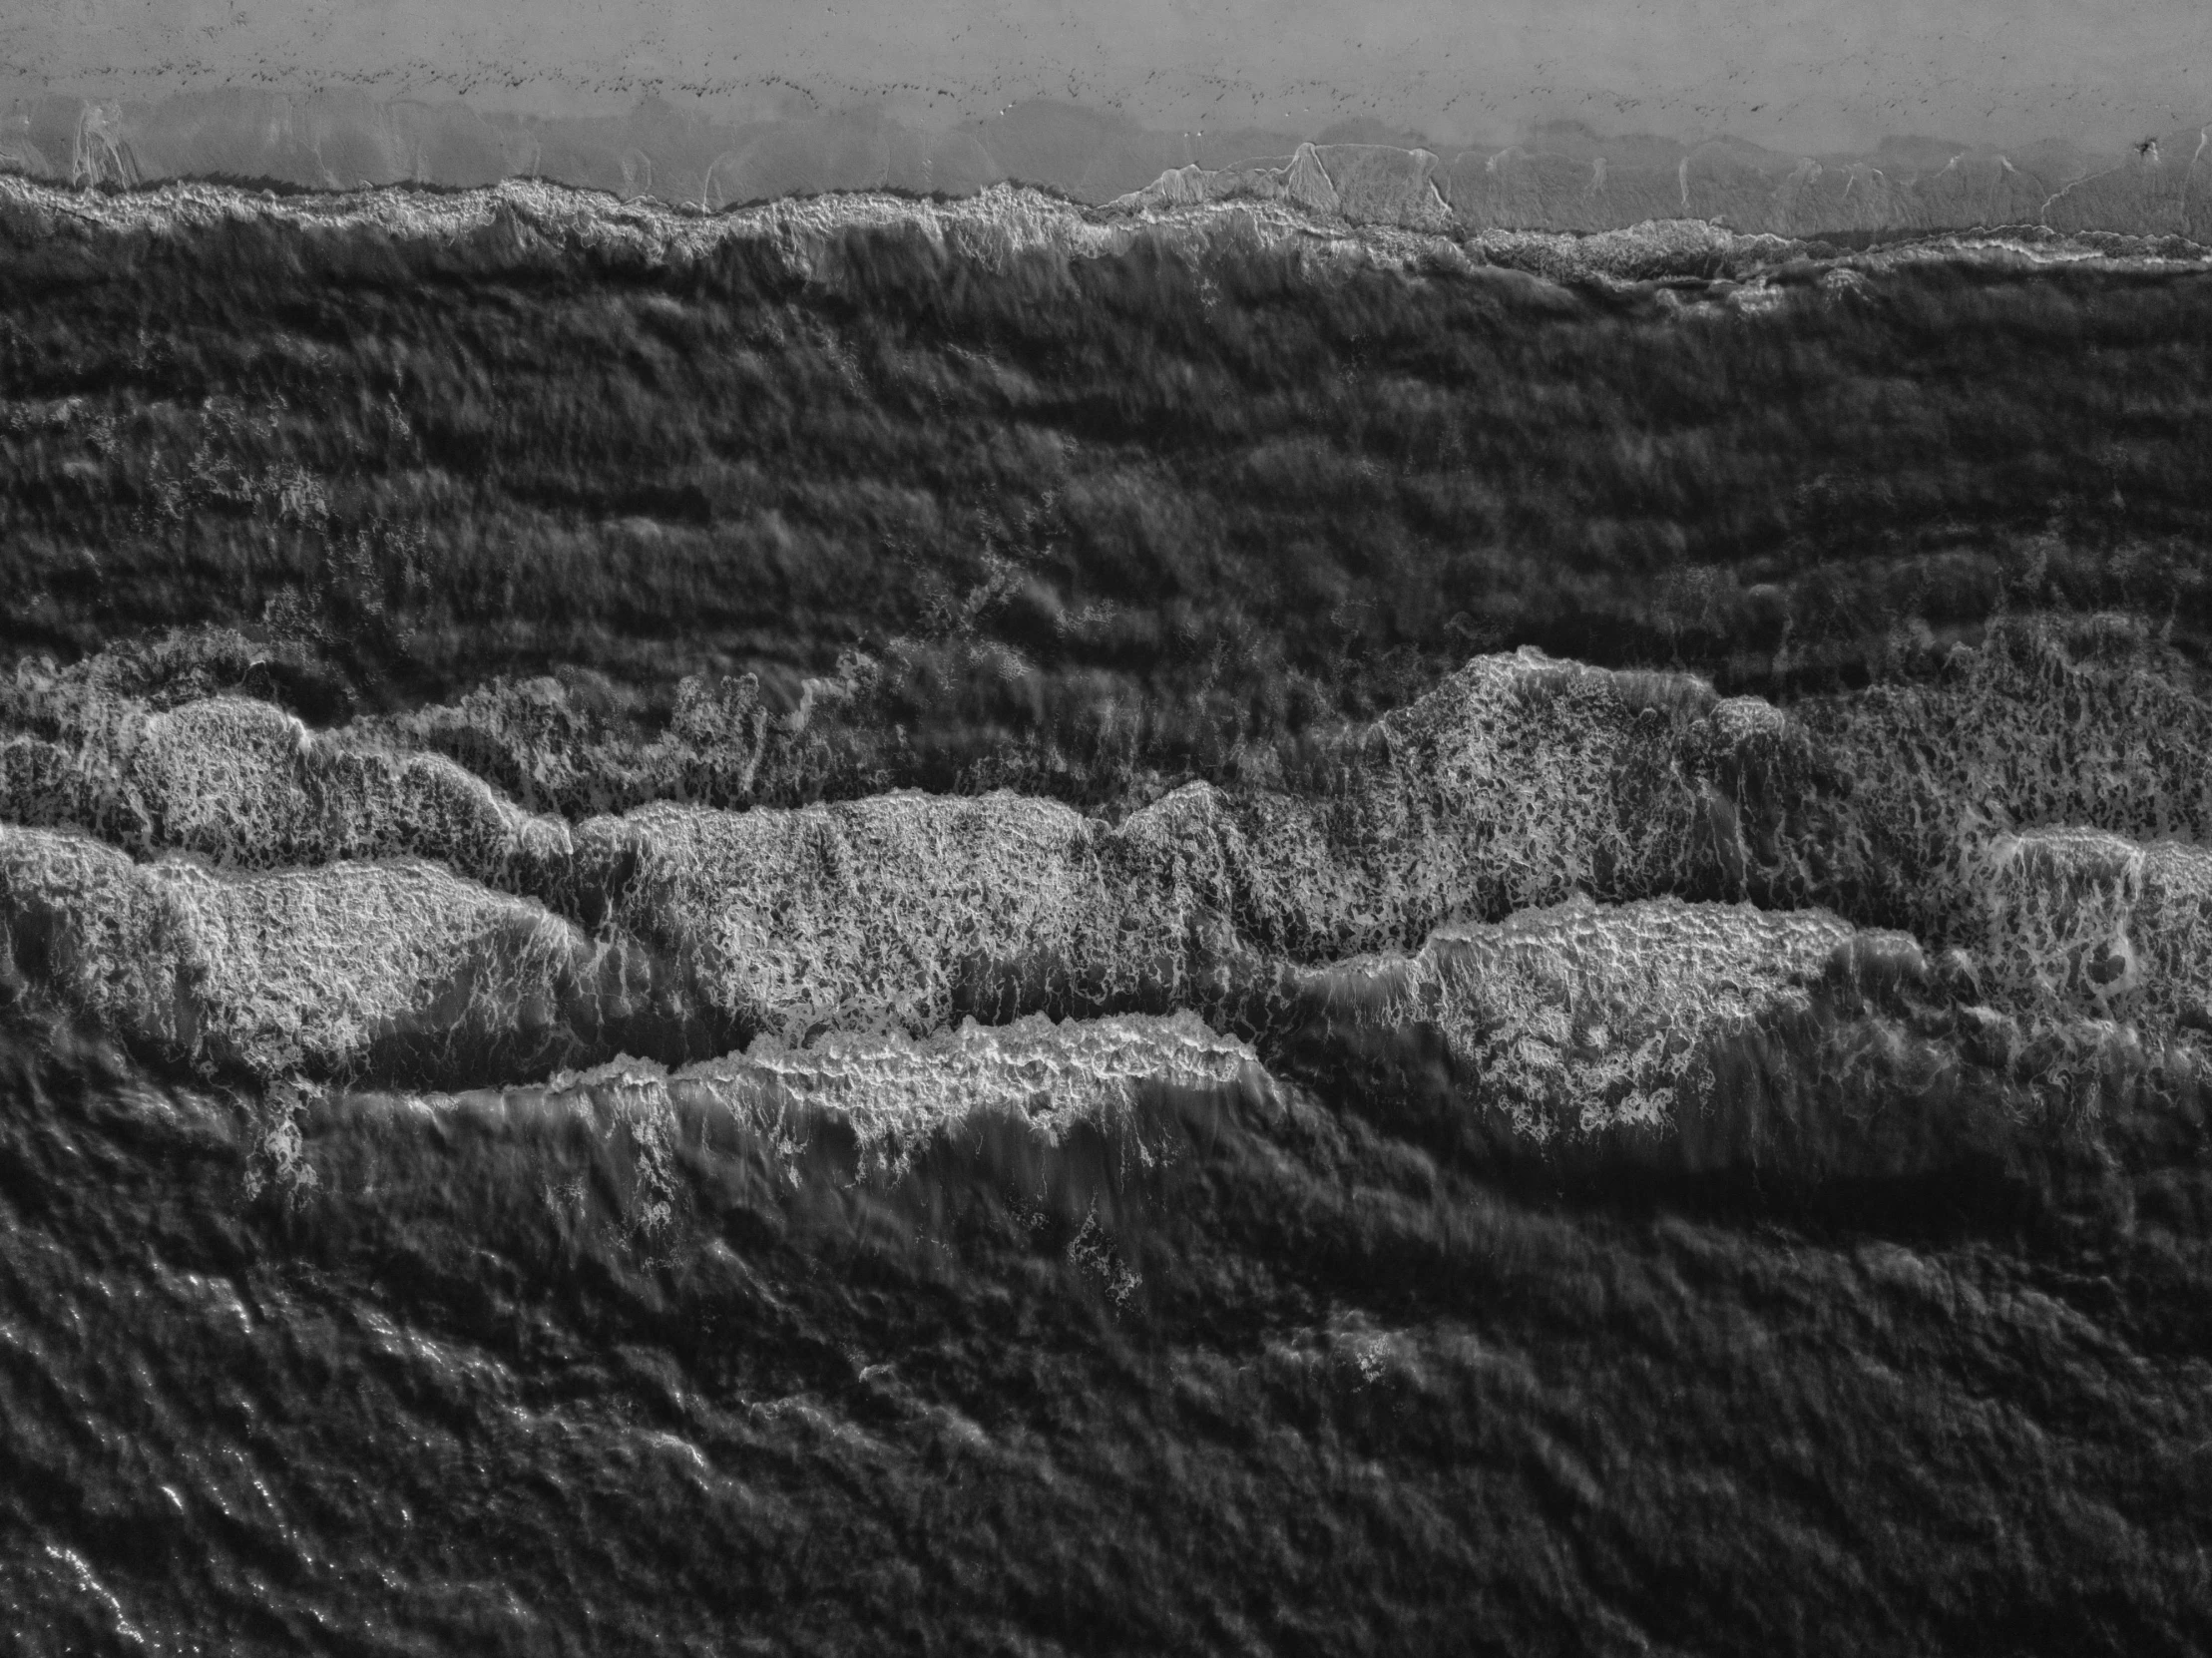 a herd of sheep standing on top of a lush green field, a microscopic photo, by Jan Konůpek, conceptual art, in rough seas with large waves, grainy black and white footage, shiny layered geological strata, taken from a plane